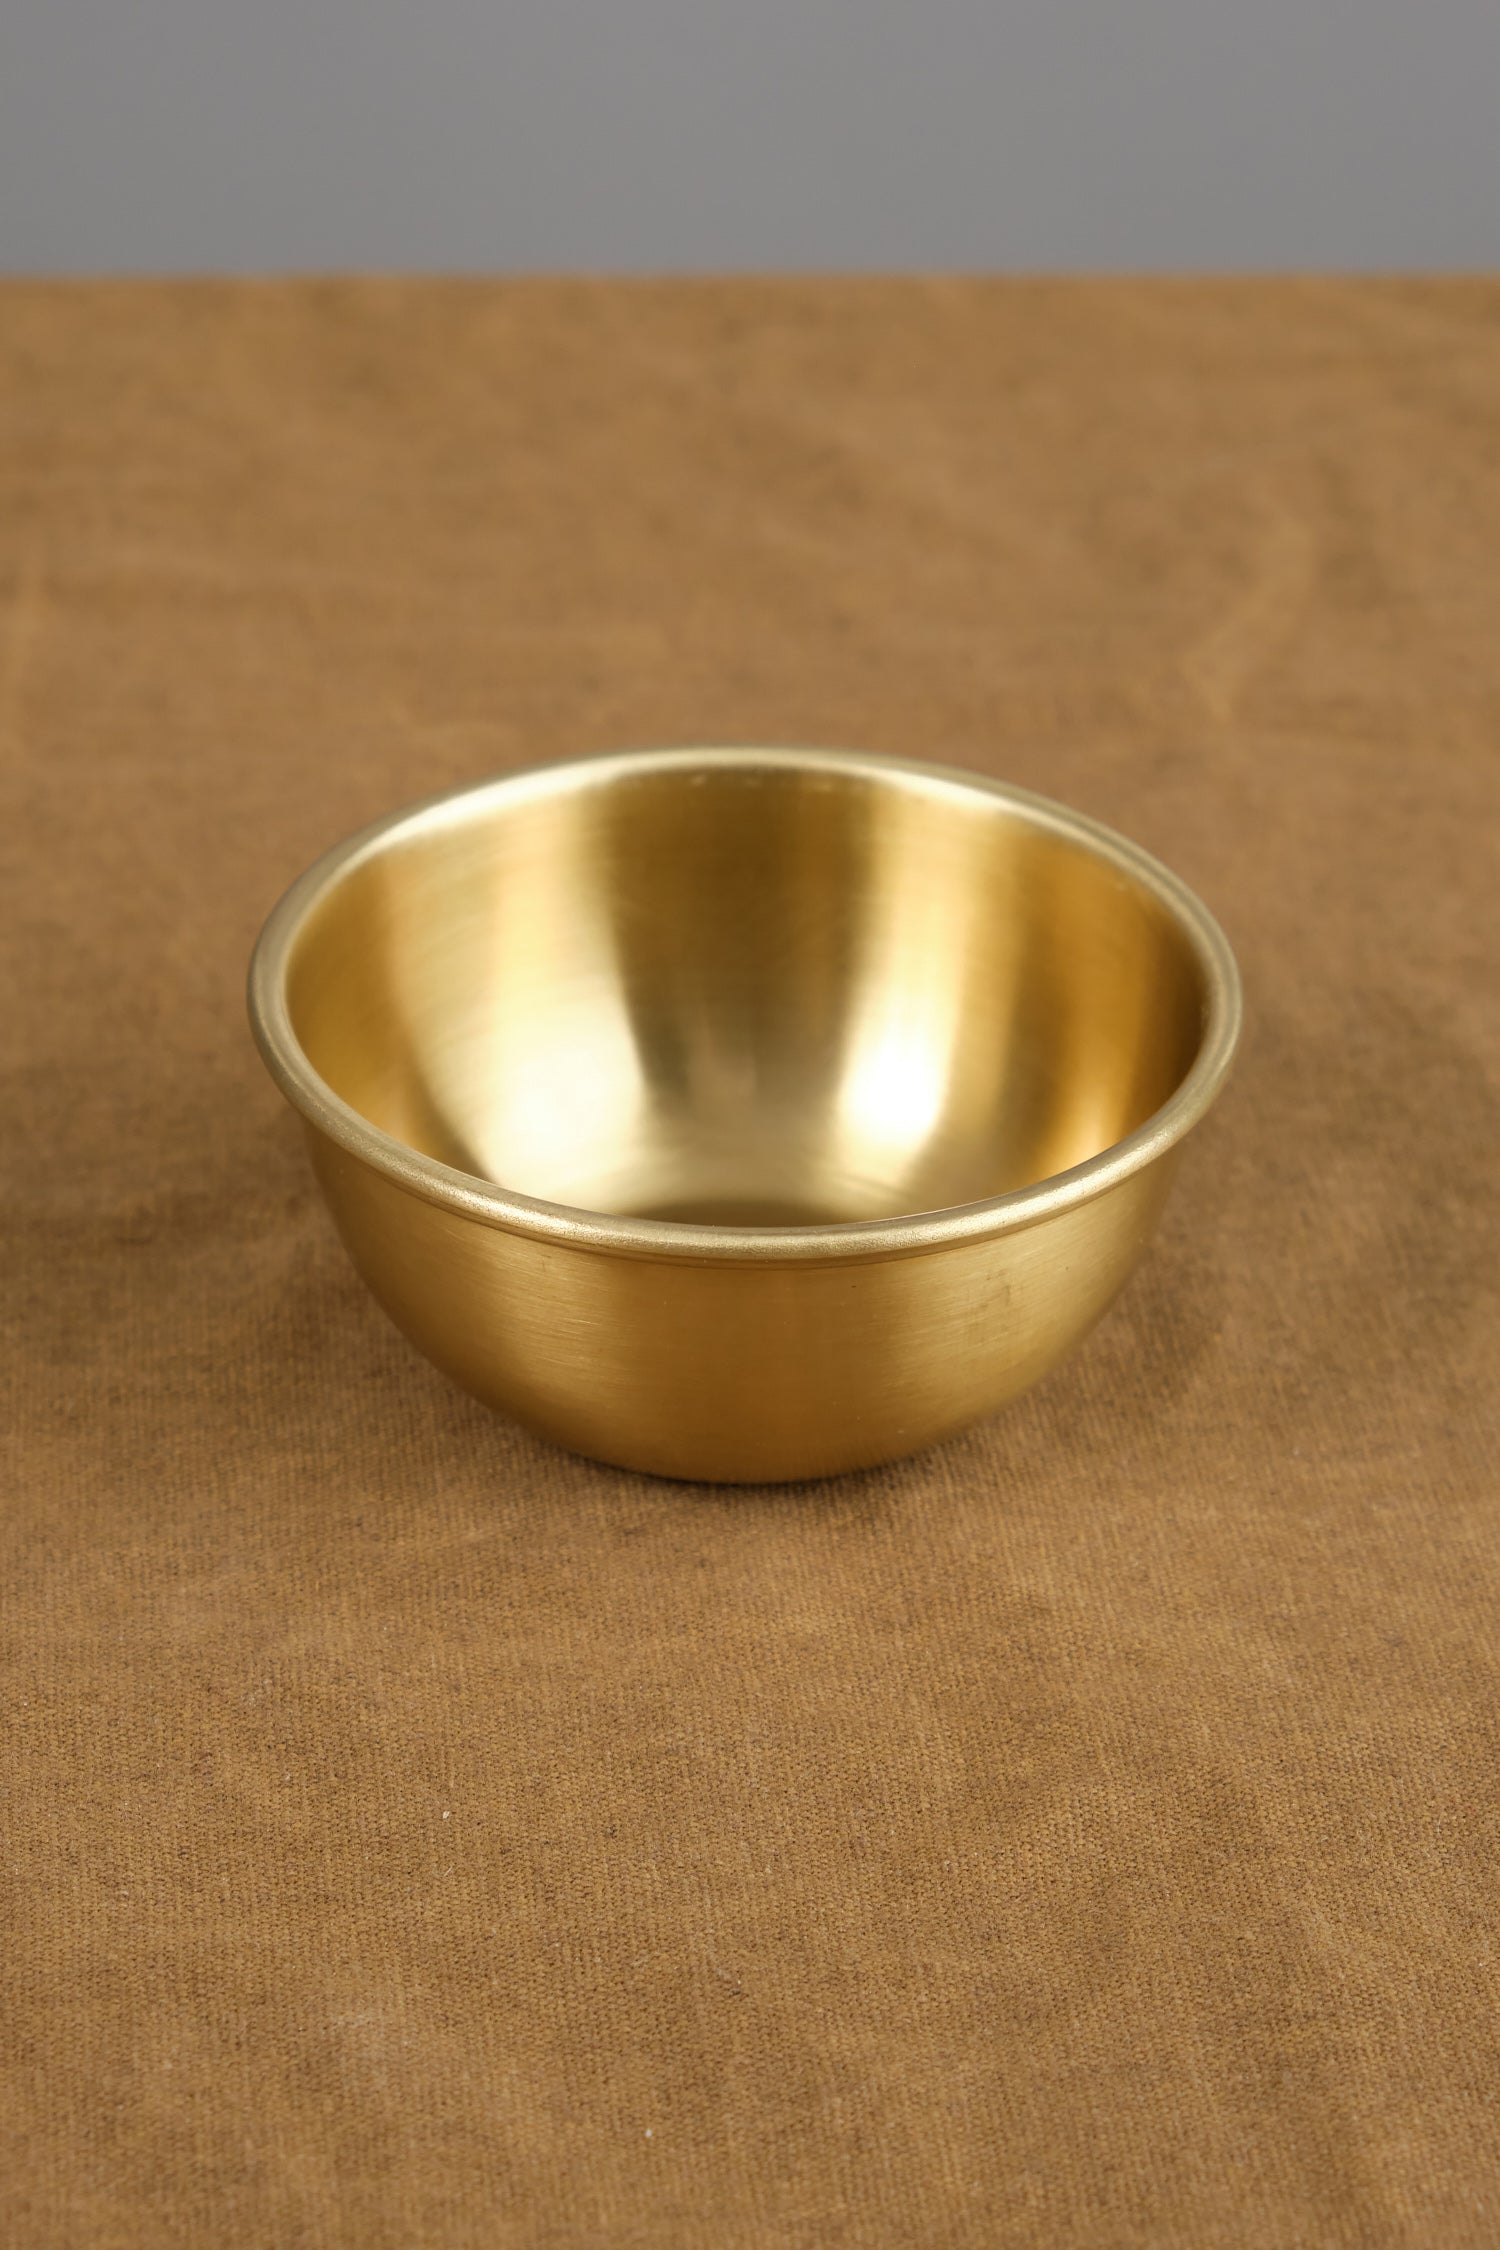 Small Brass Bowl on table